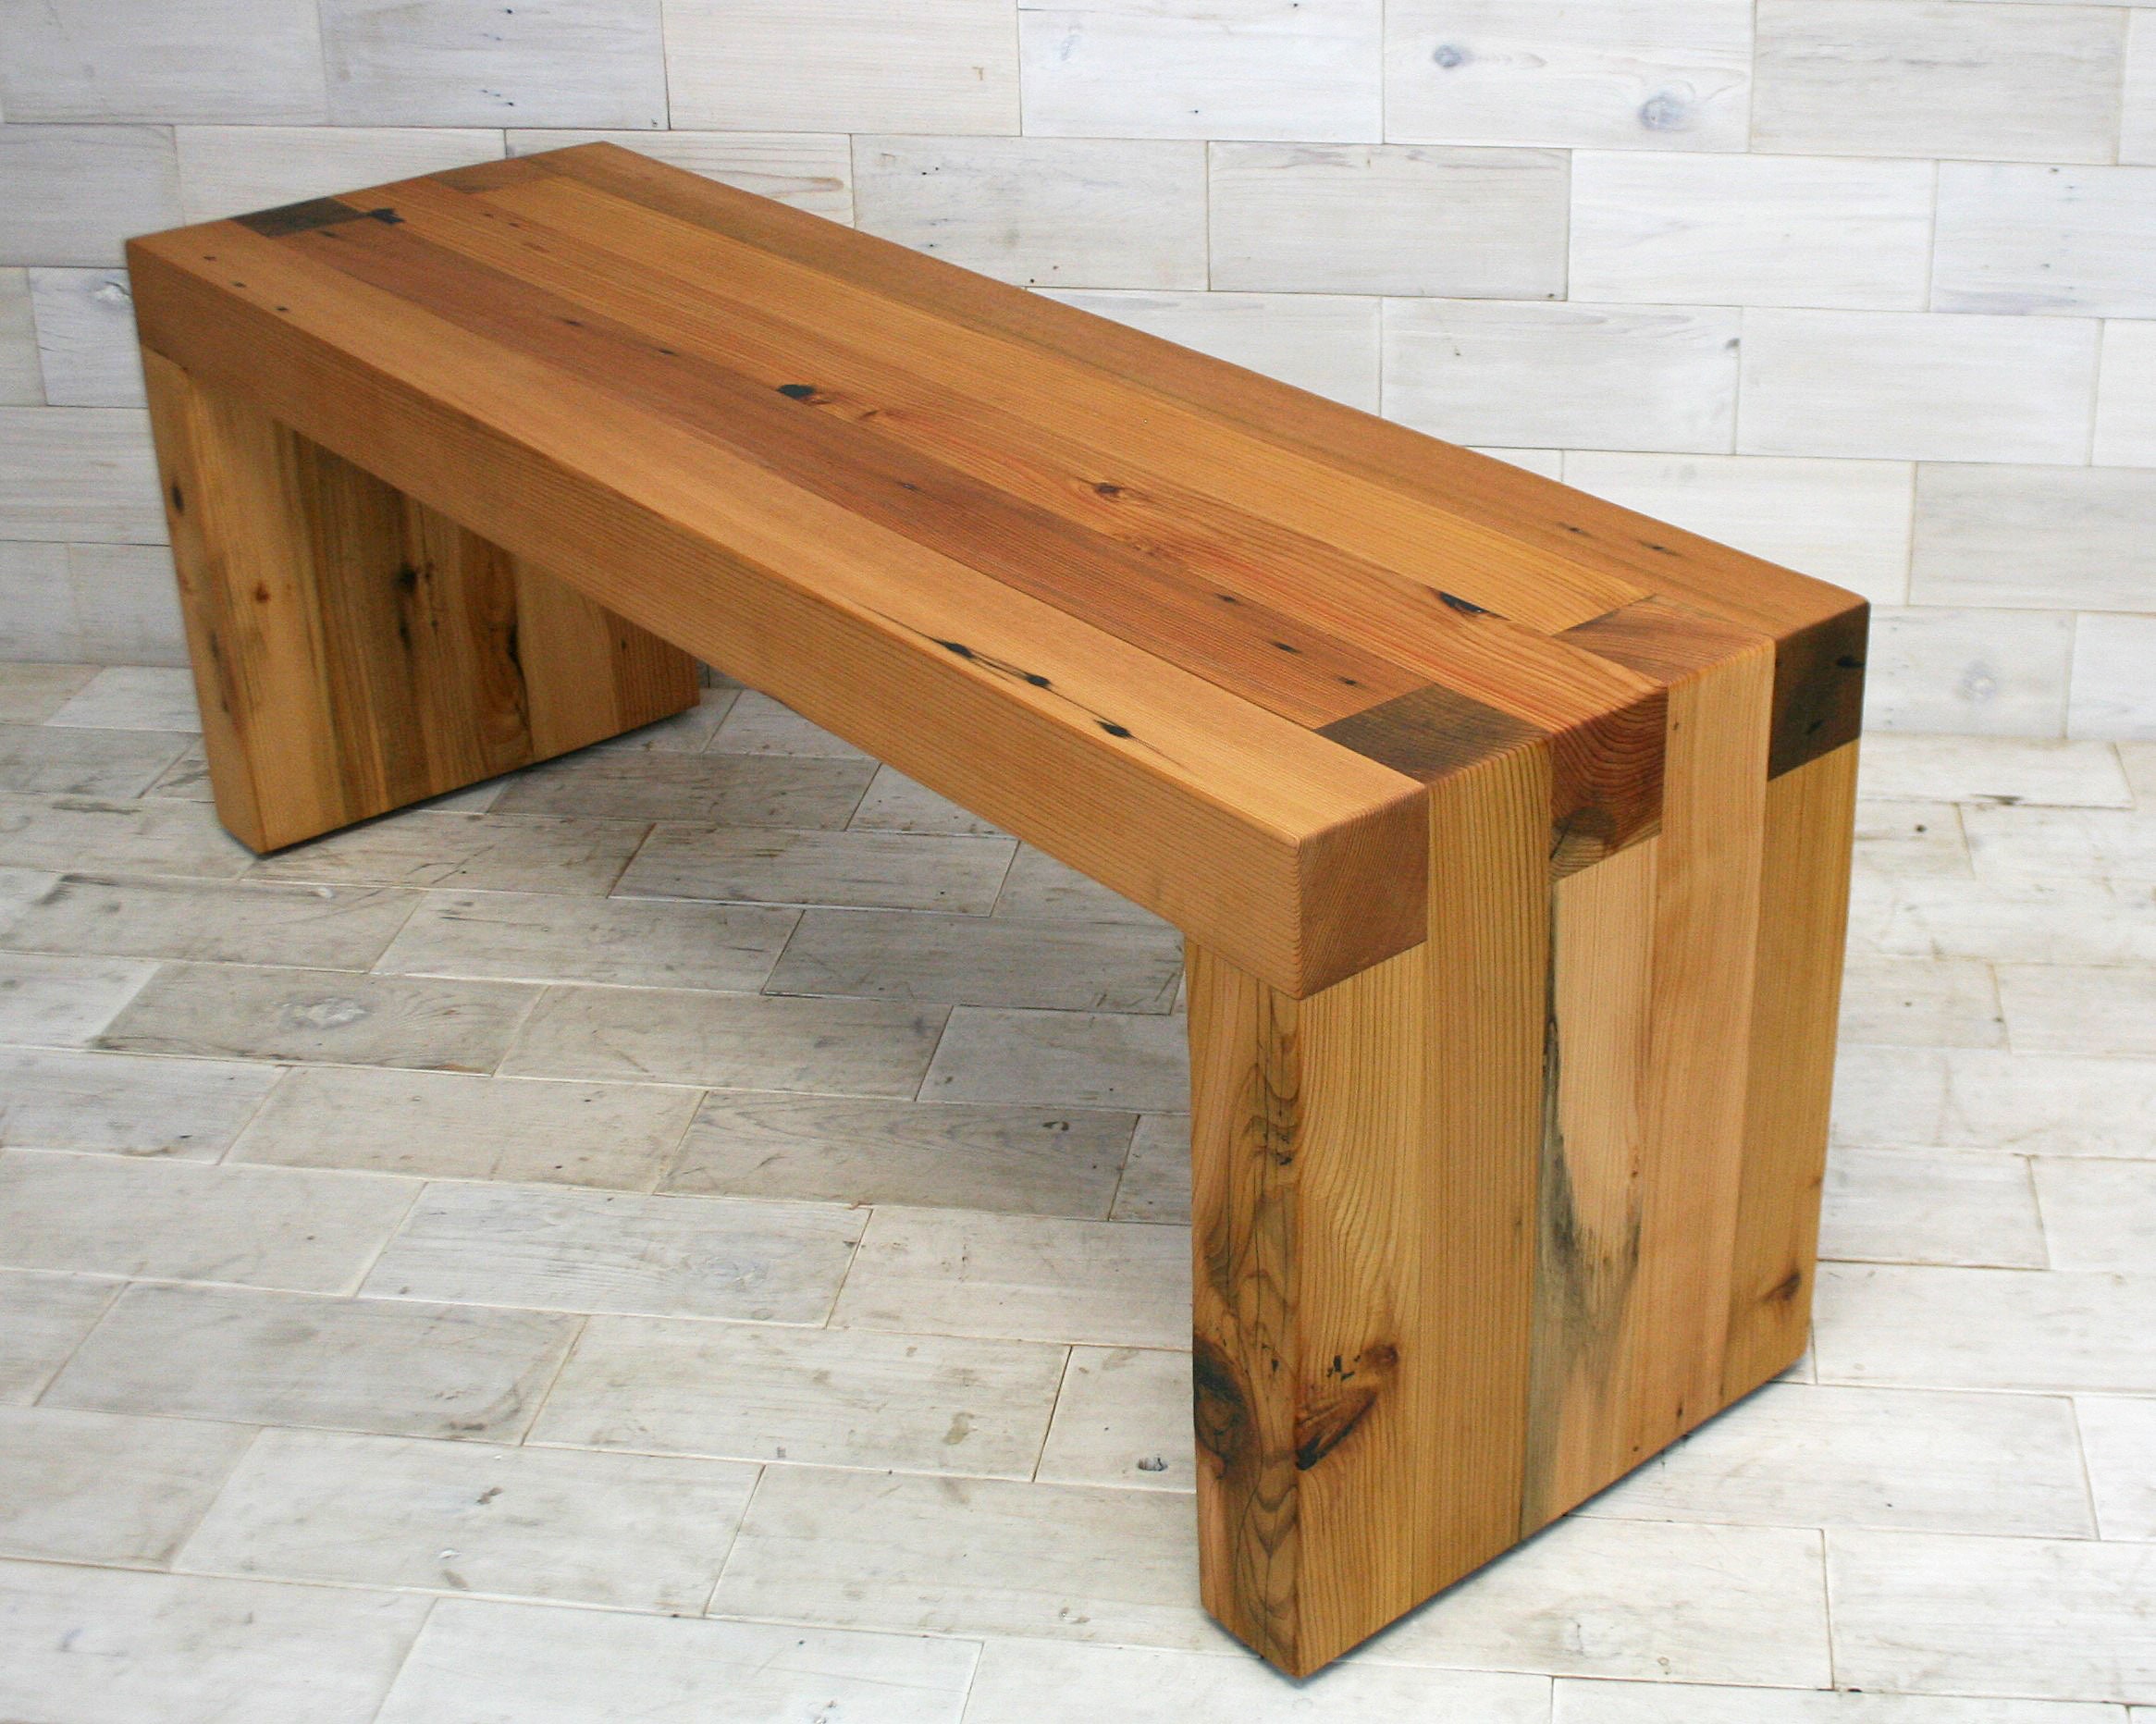 Box Joint Bench 48 long made from Reclaimed Cedar